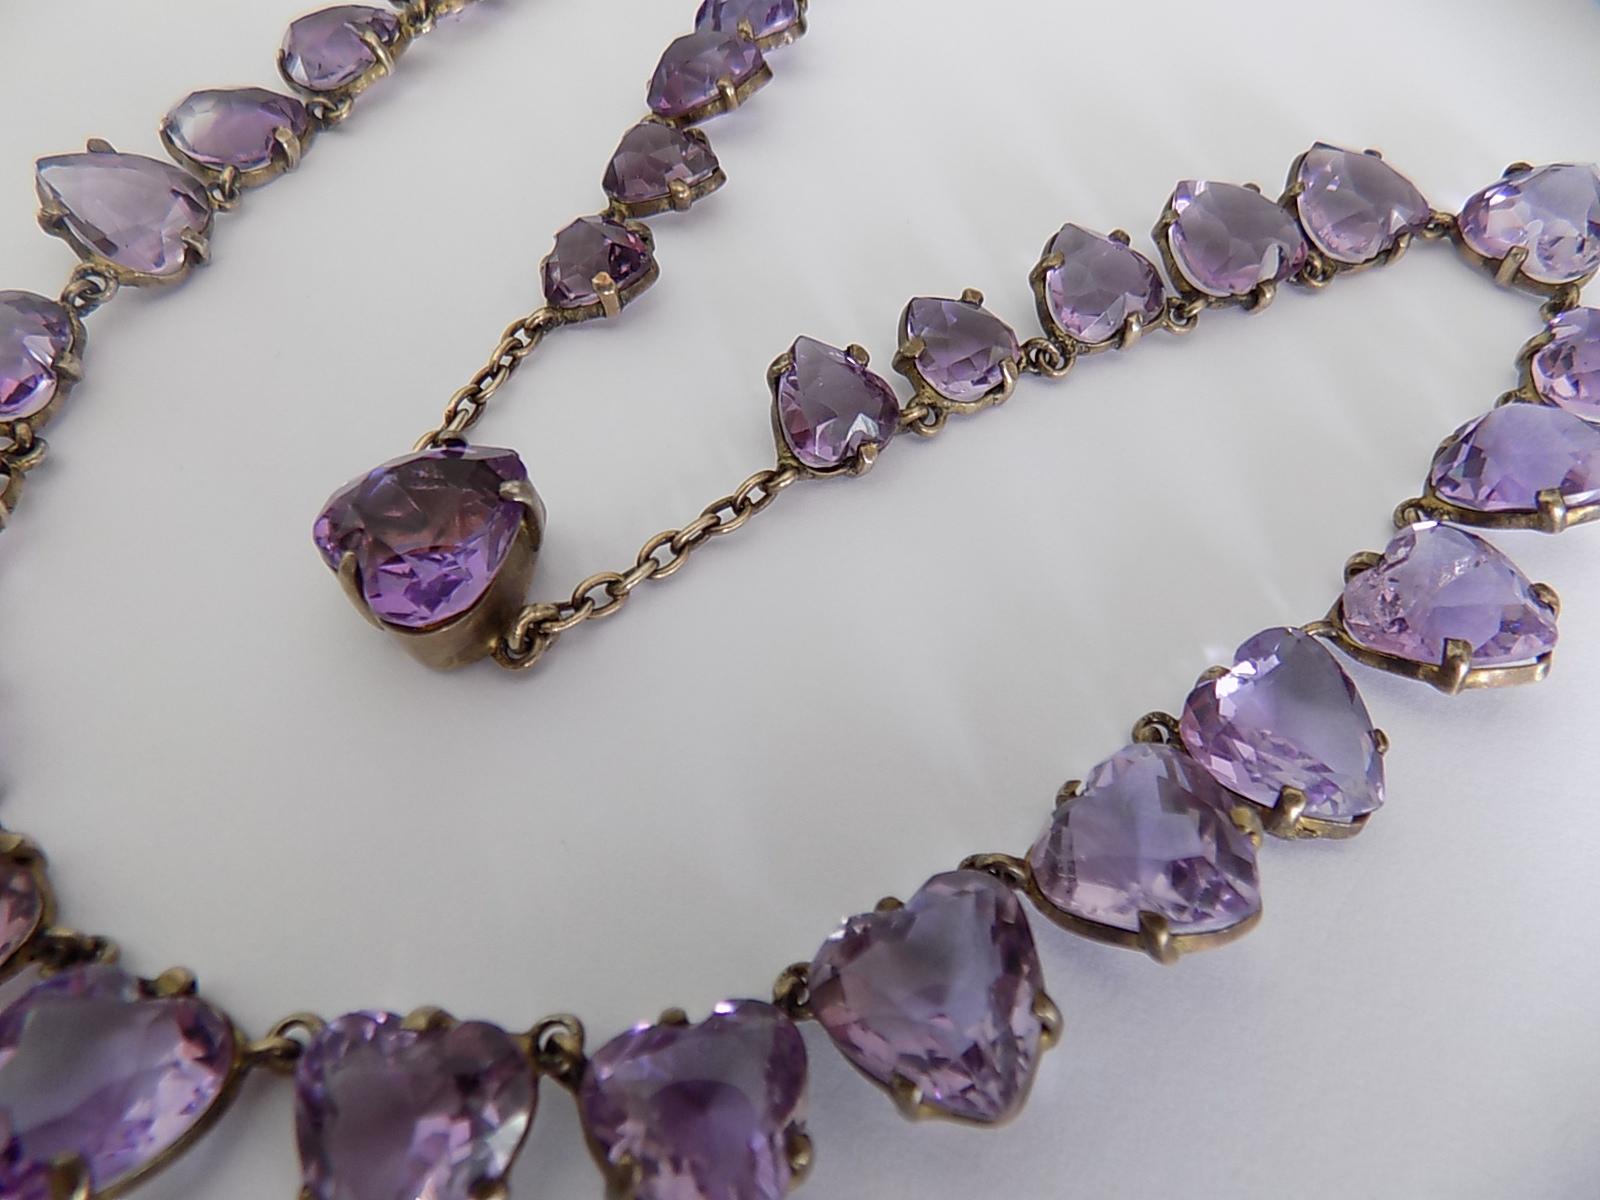 Outstanding Victorian solid silver gilt and heart shaped natural Amethyst Riviere necklace.  Rare find.
Total length including clasp 17 1/2